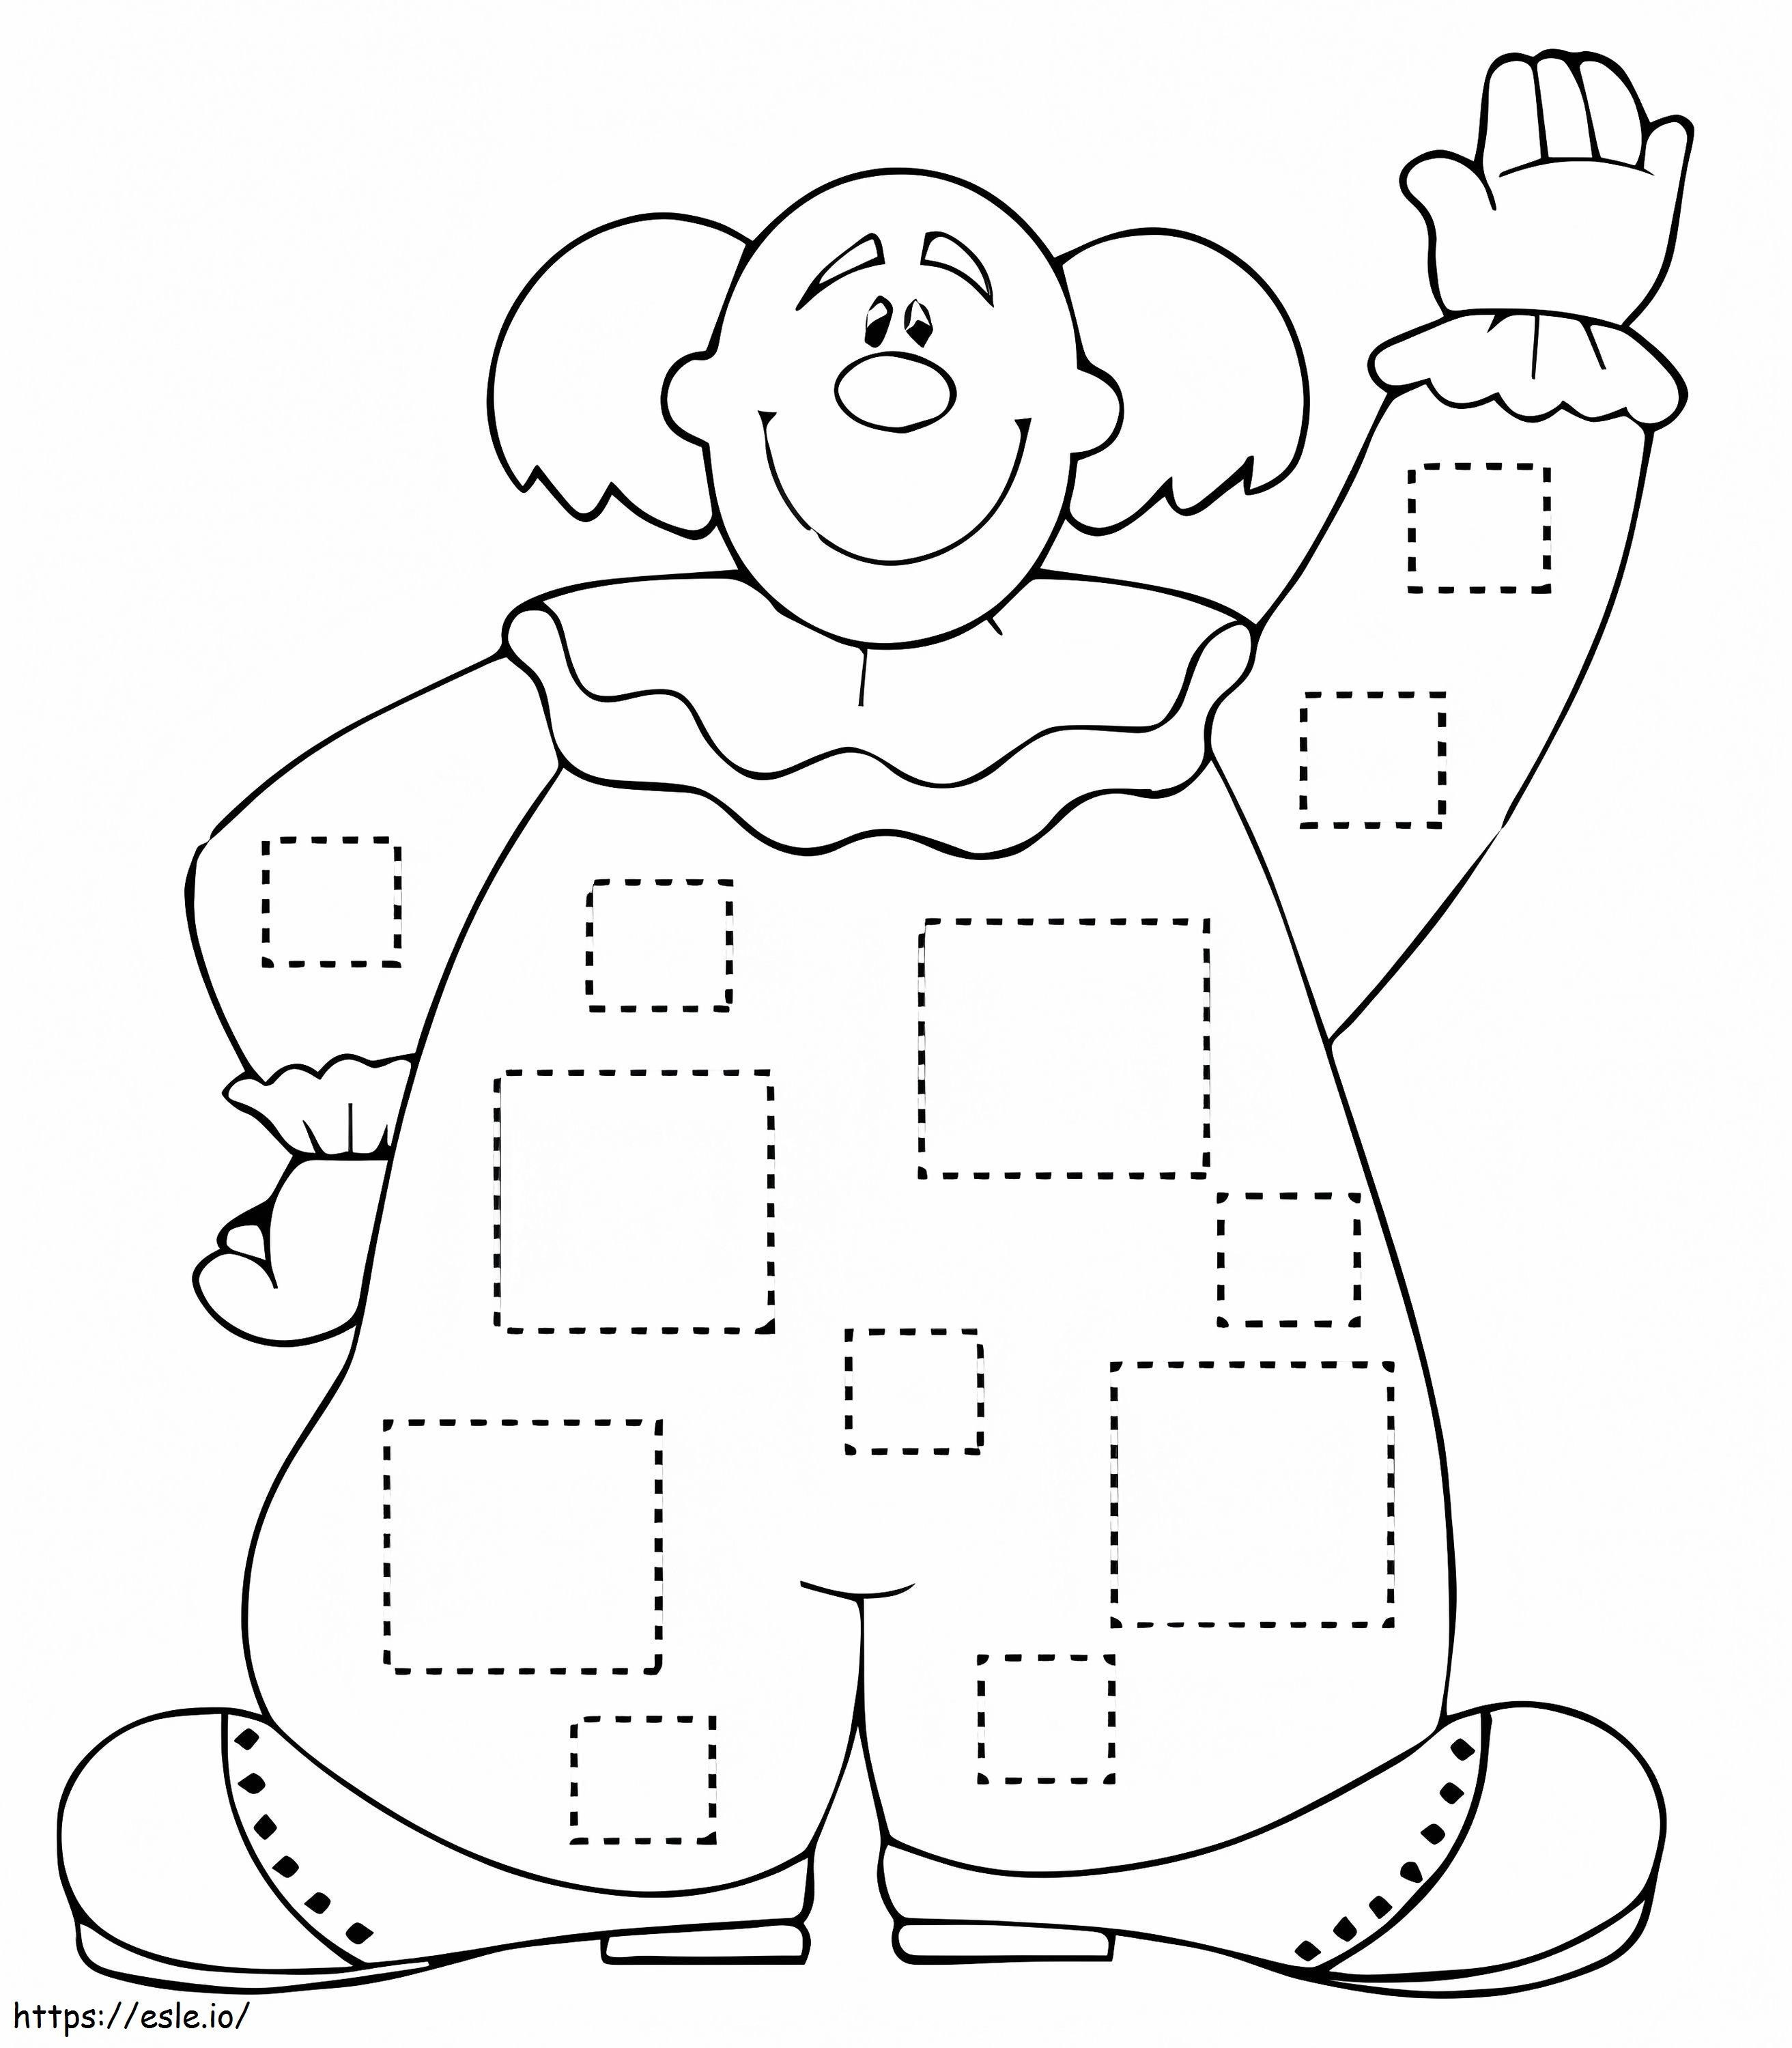 Fat Clown coloring page